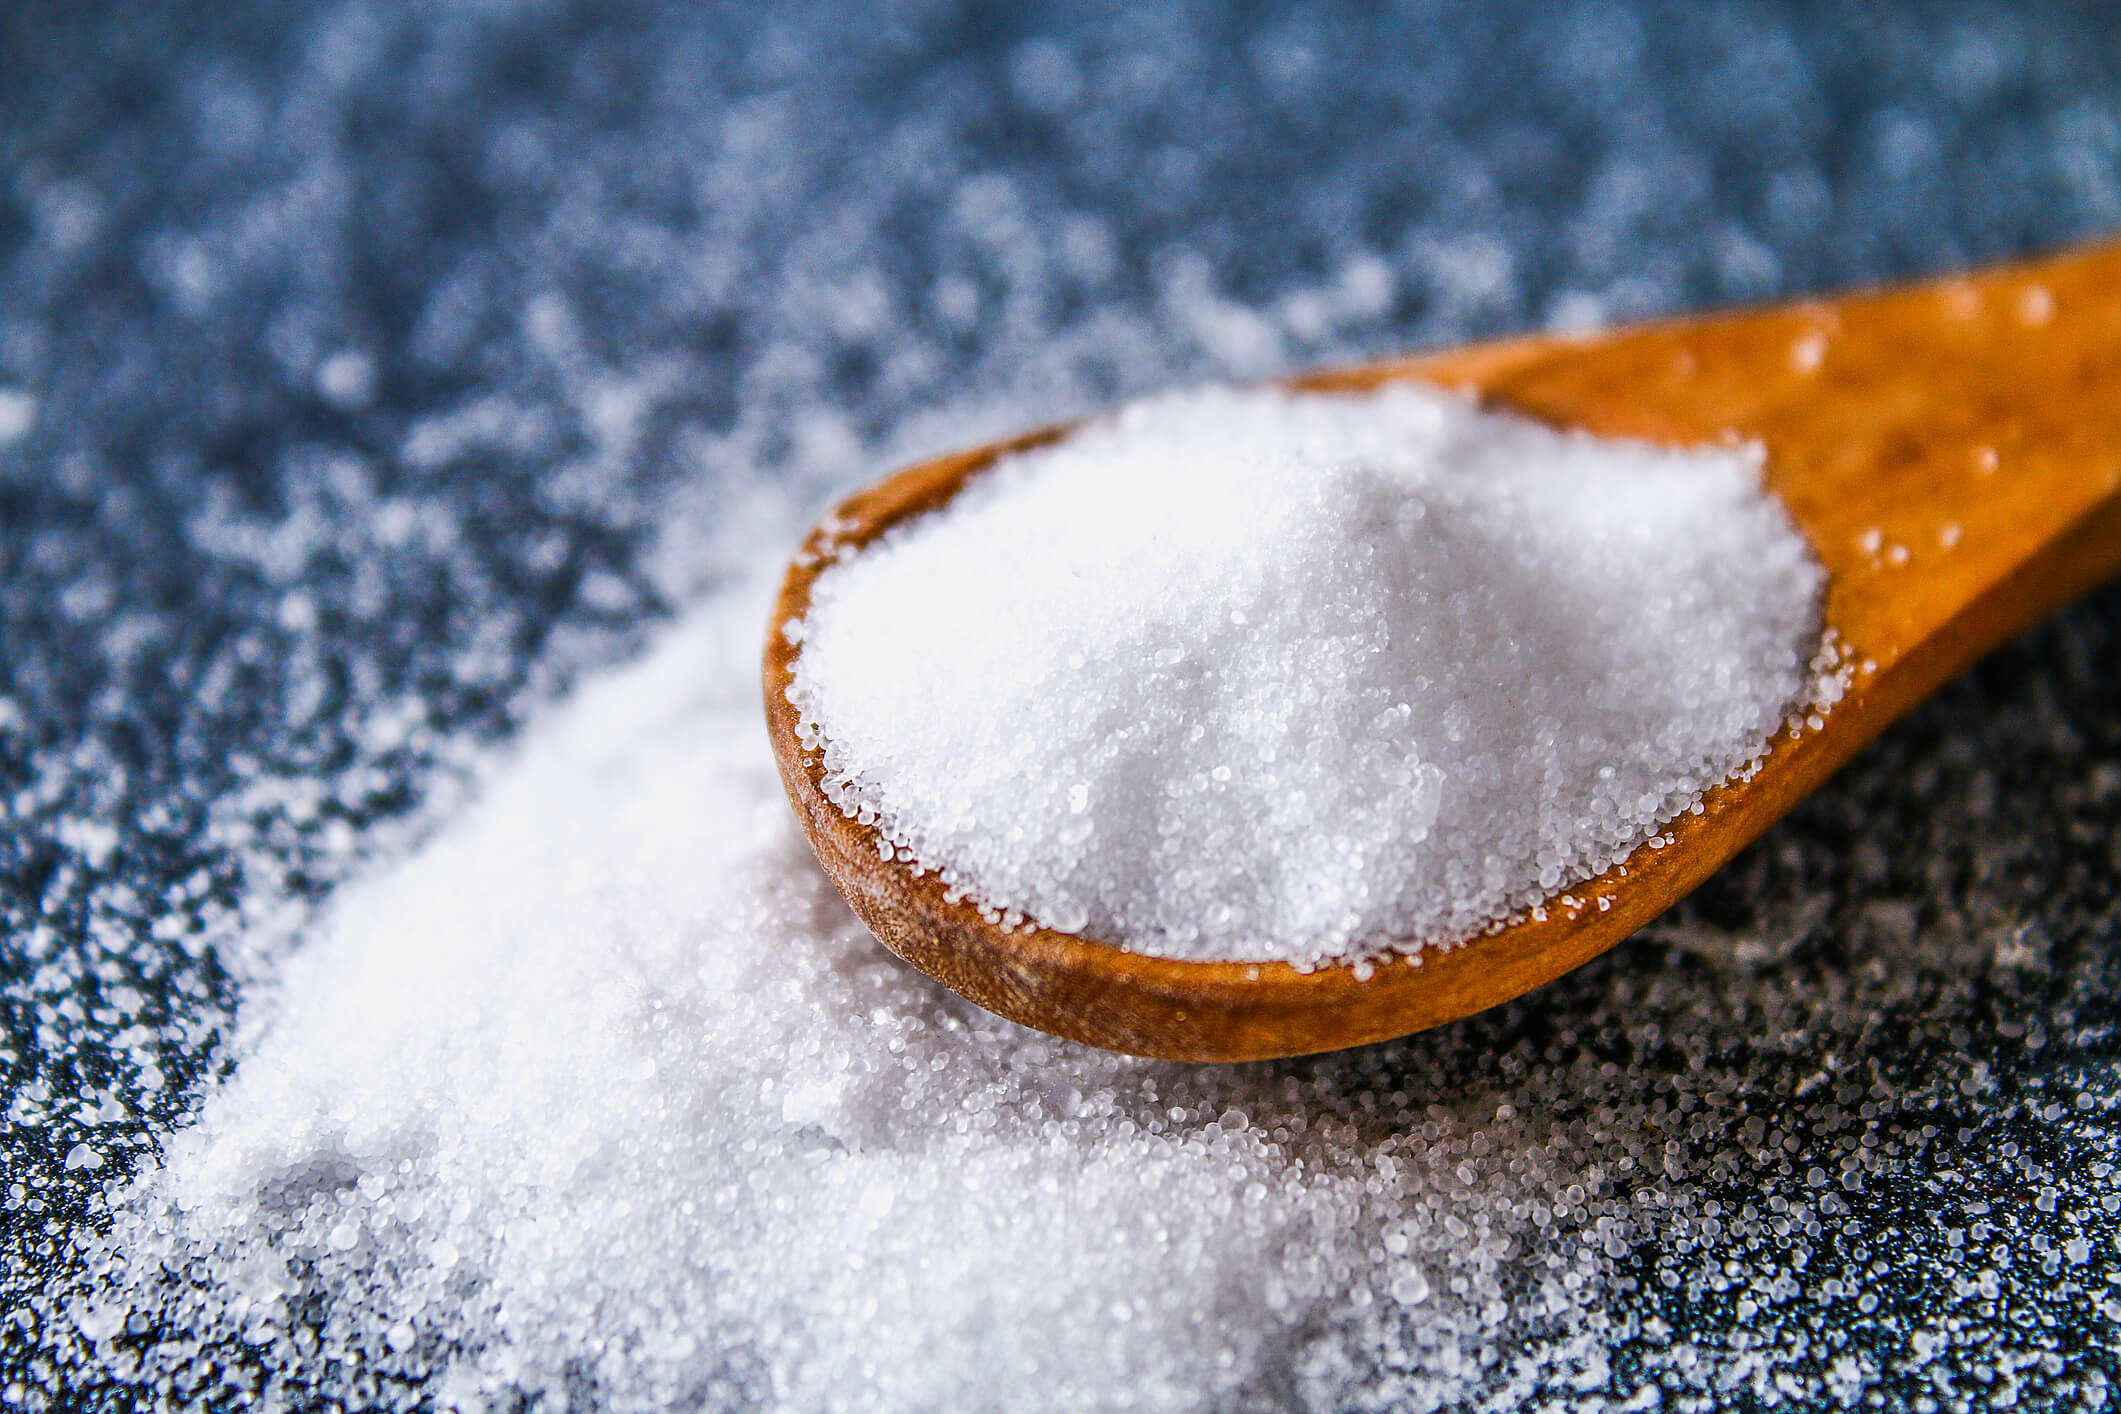 table salt is not the same as SALT (state and local taxes)